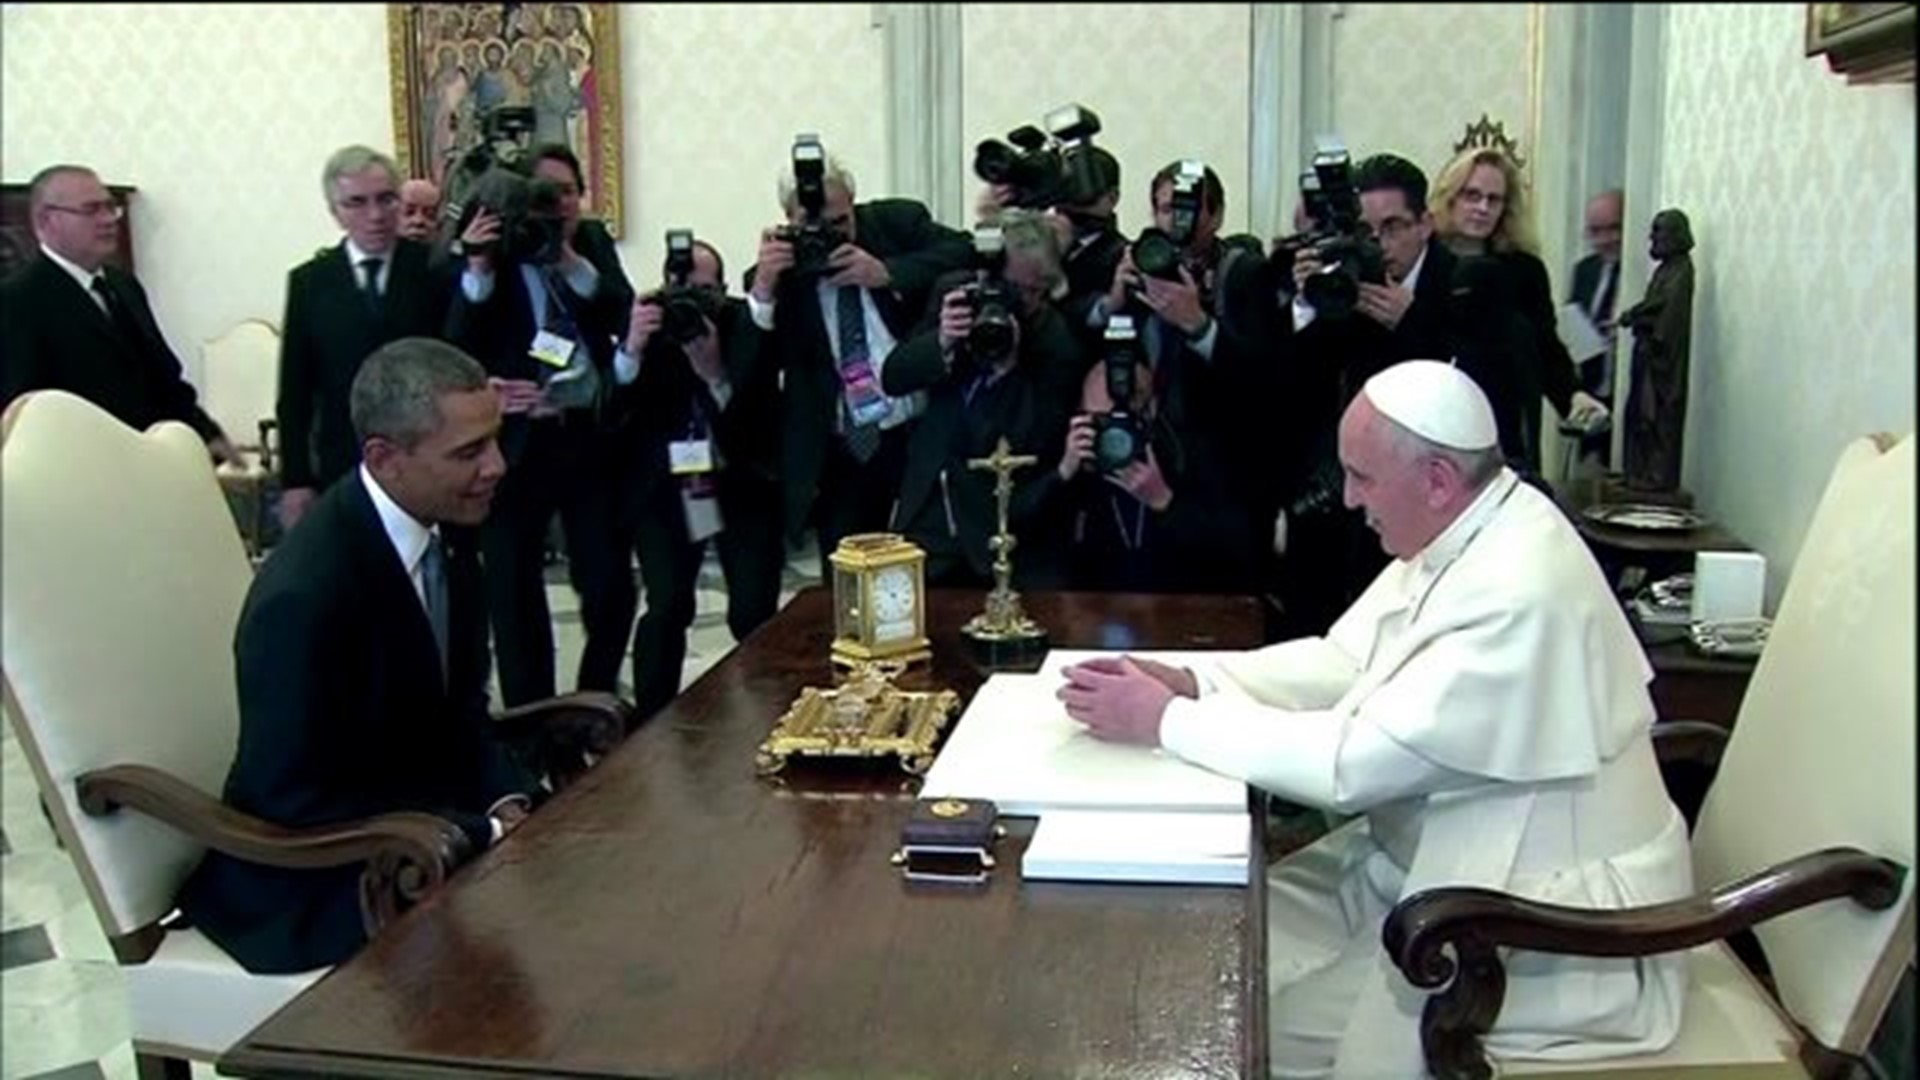 Pope Francis arrives for first US trip